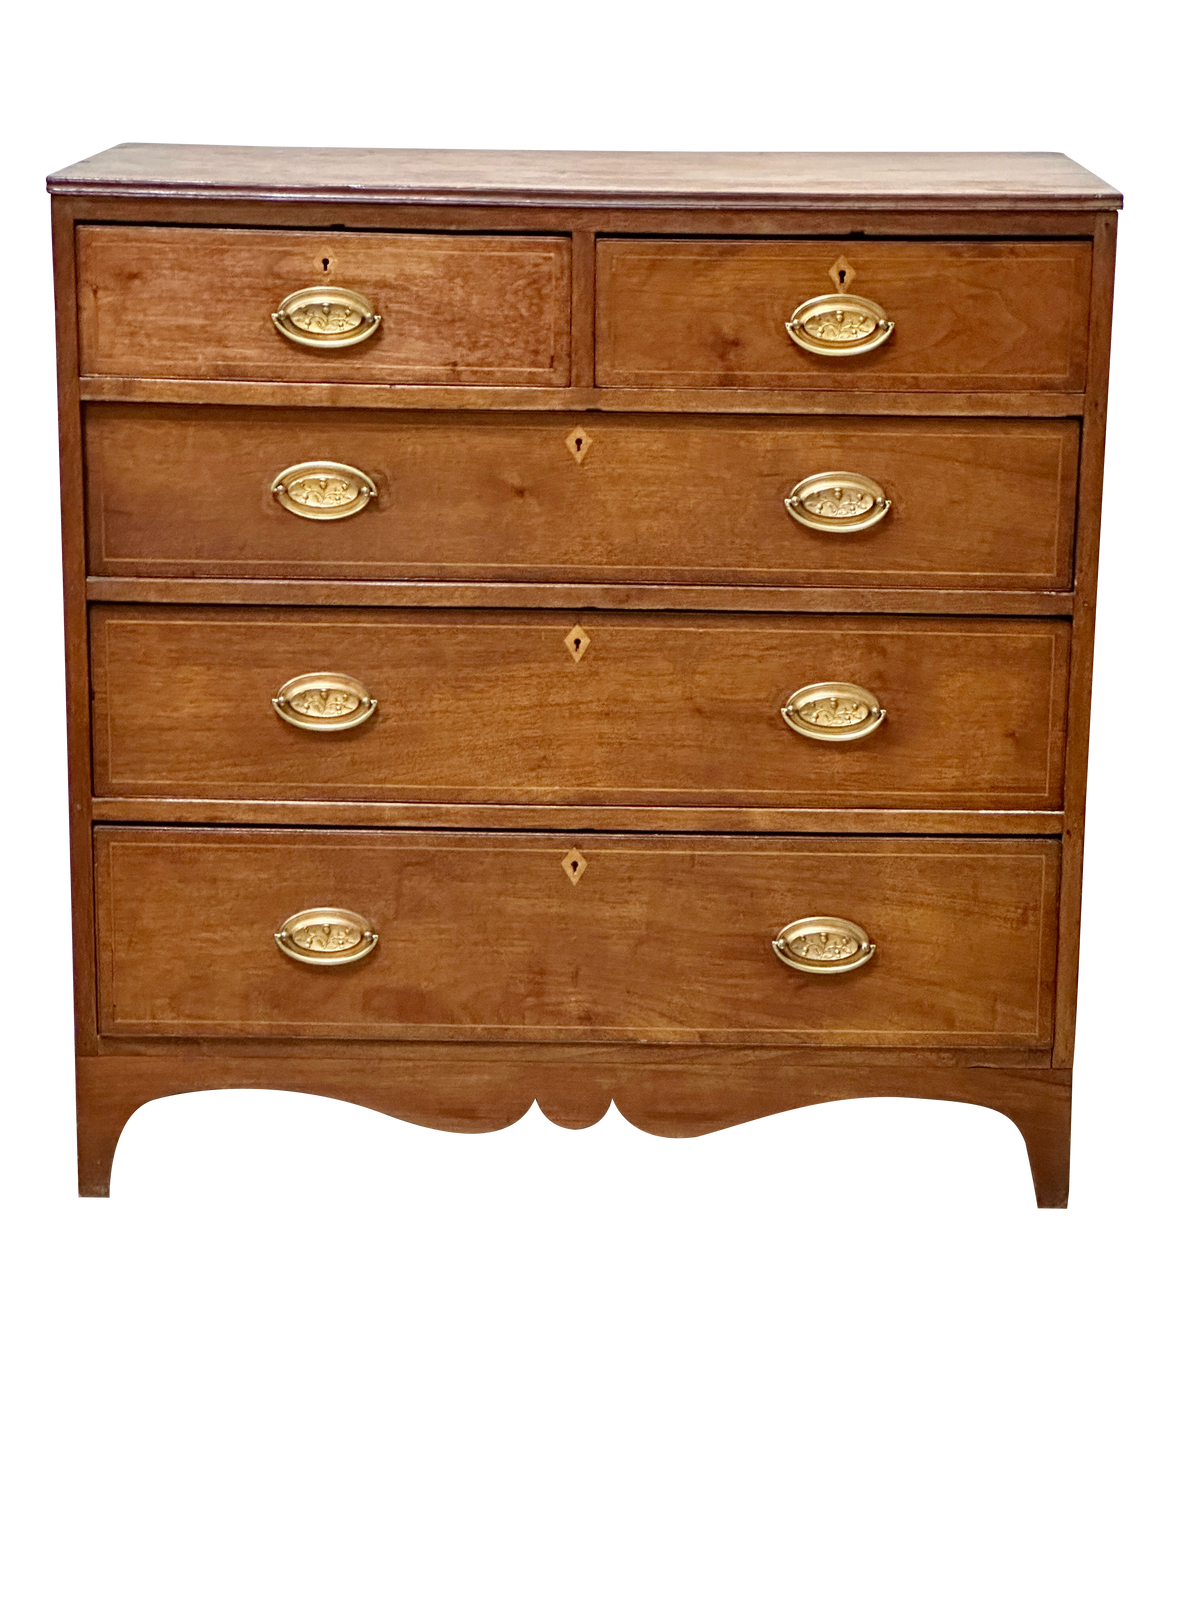 Fine Shenandoah Valley Virginia Chest of Drawers, c. 1800